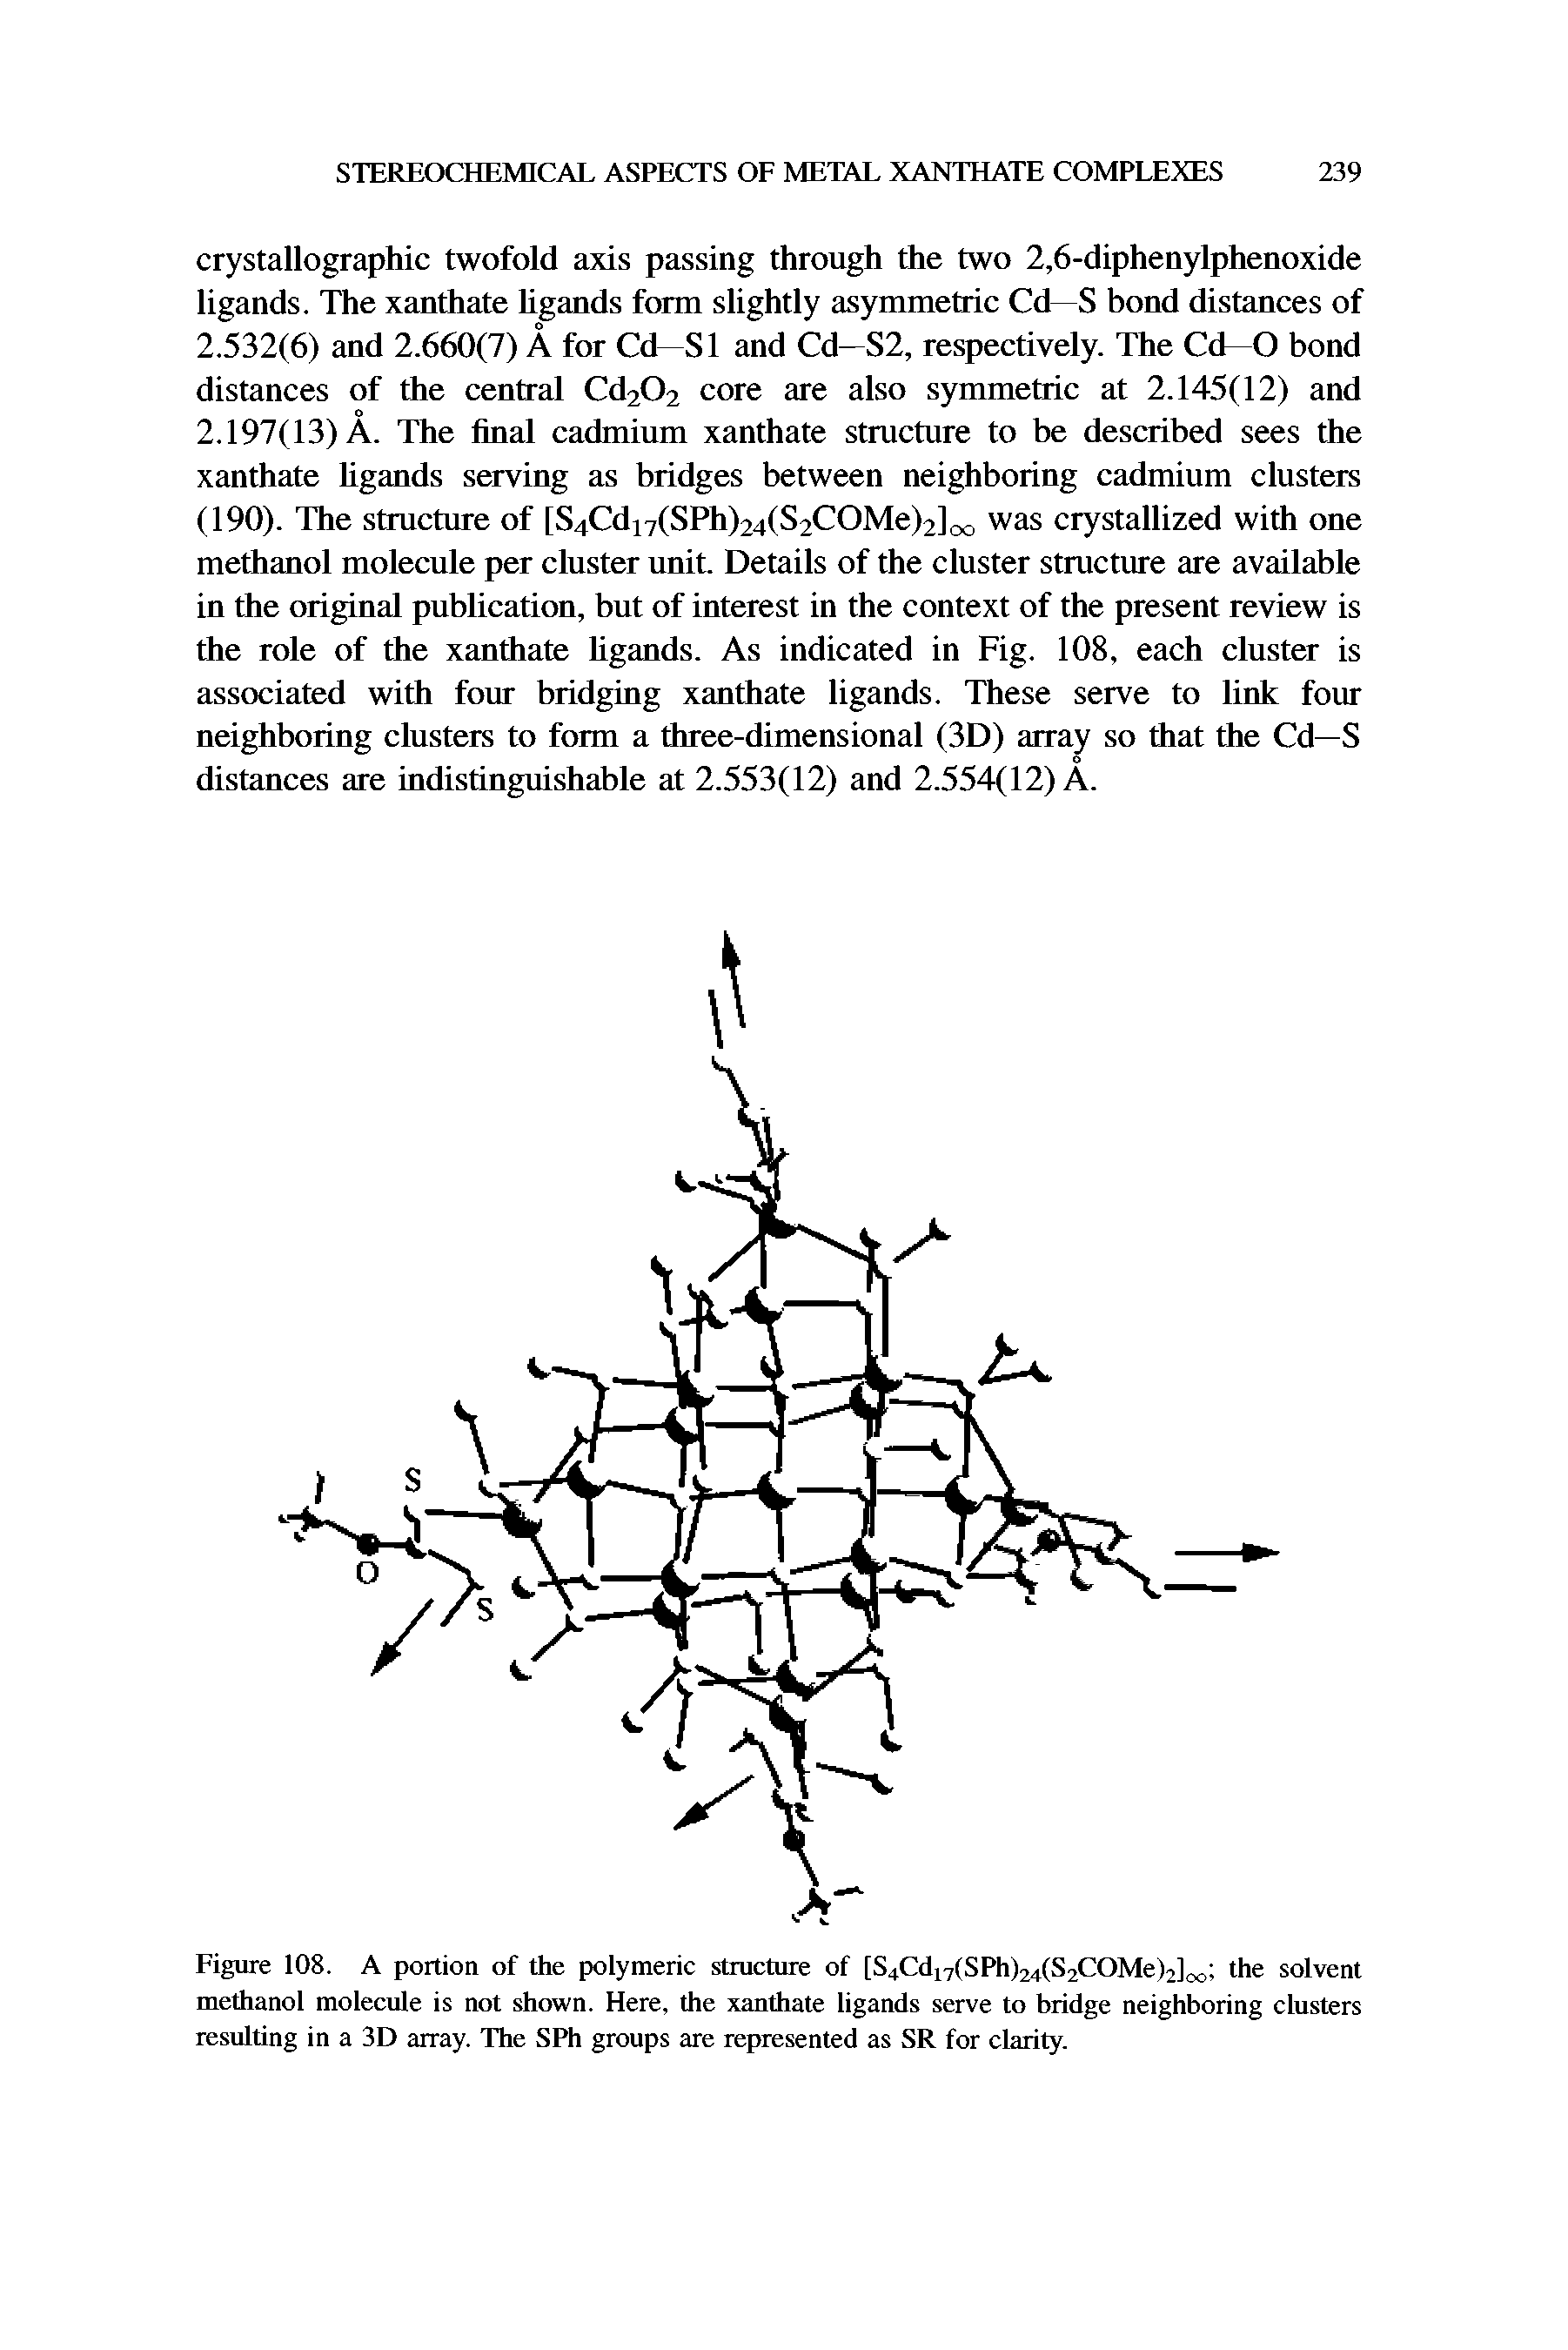 Figure 108. A portion of the polymeric structure of [SjCd tSPh O f-OMeF], the solvent methanol molecule is not shown. Here, the xanthate ligands serve to bridge neighboring clusters resulting in a 3D array. The SPh groups are represented as SR for clarity.